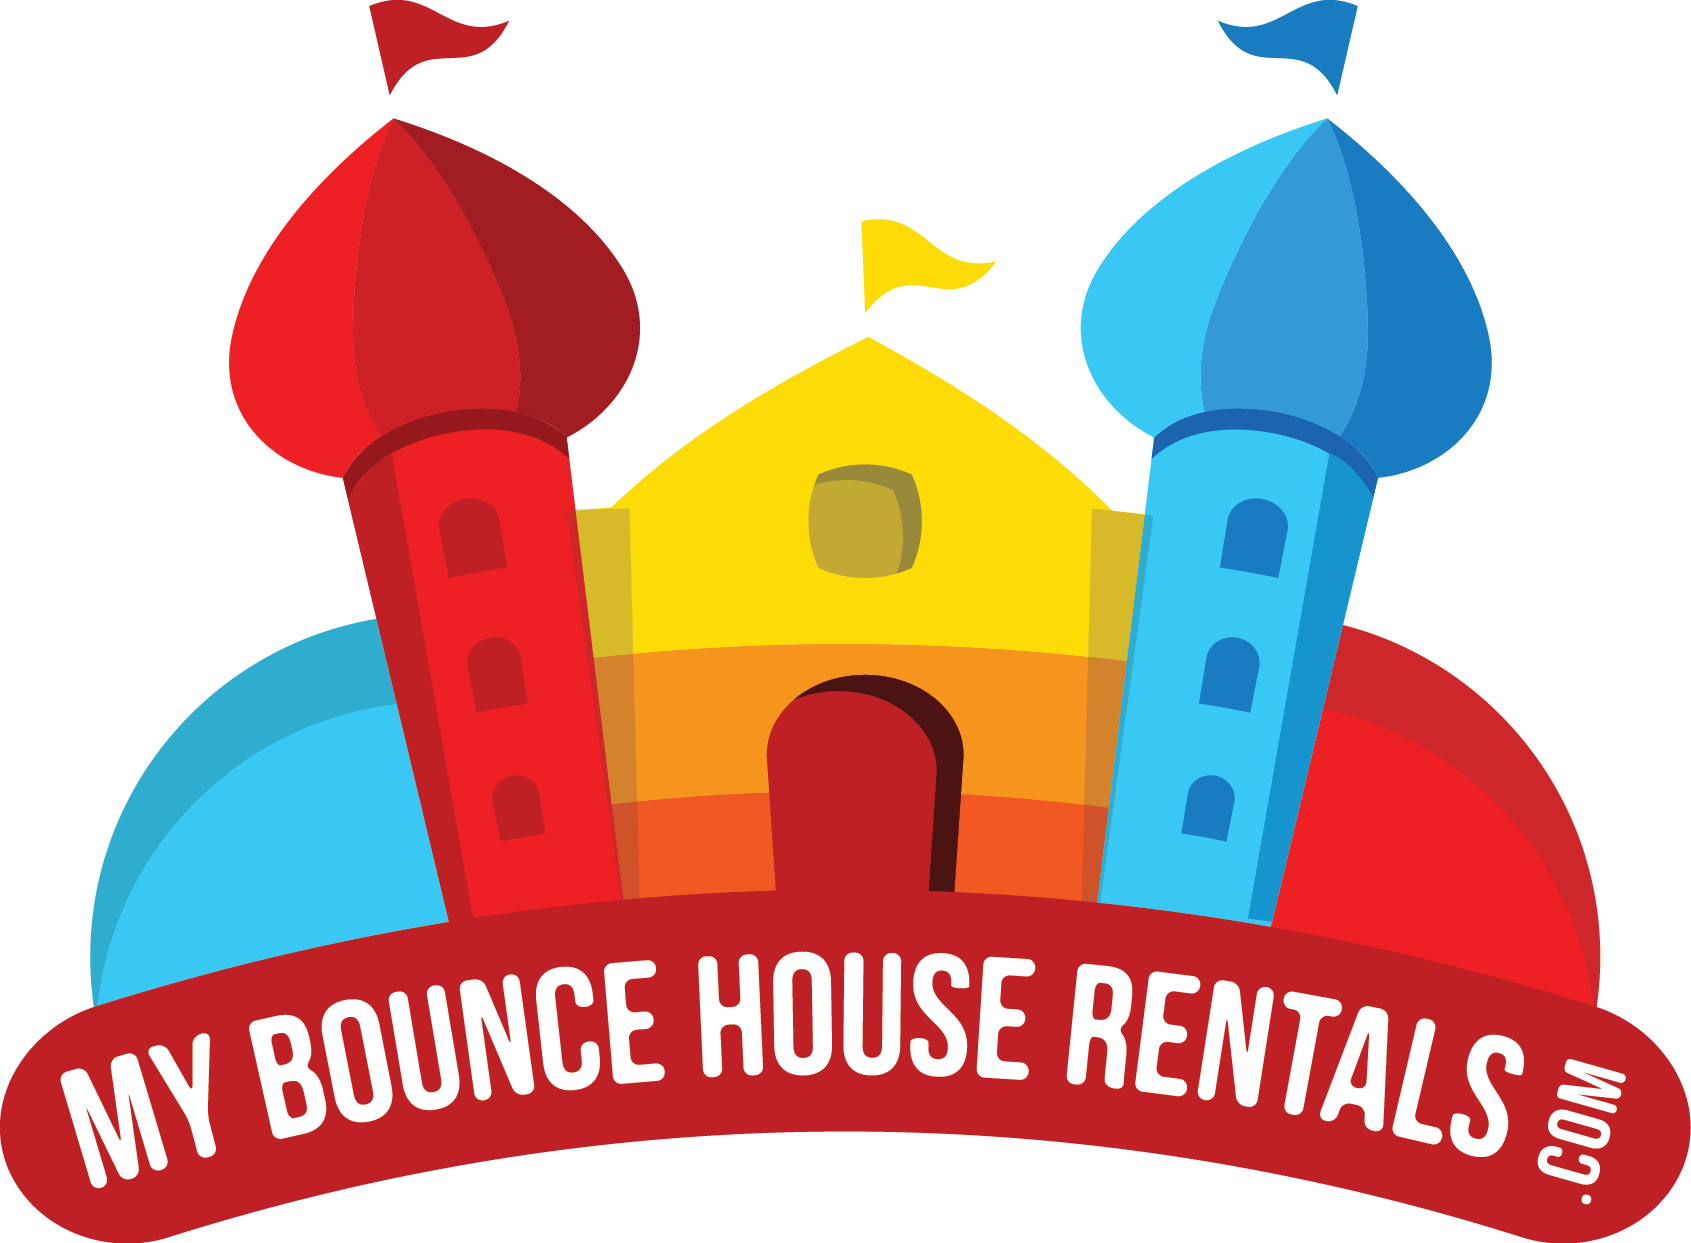 My bounce house rentals of pittsburgh's Logo